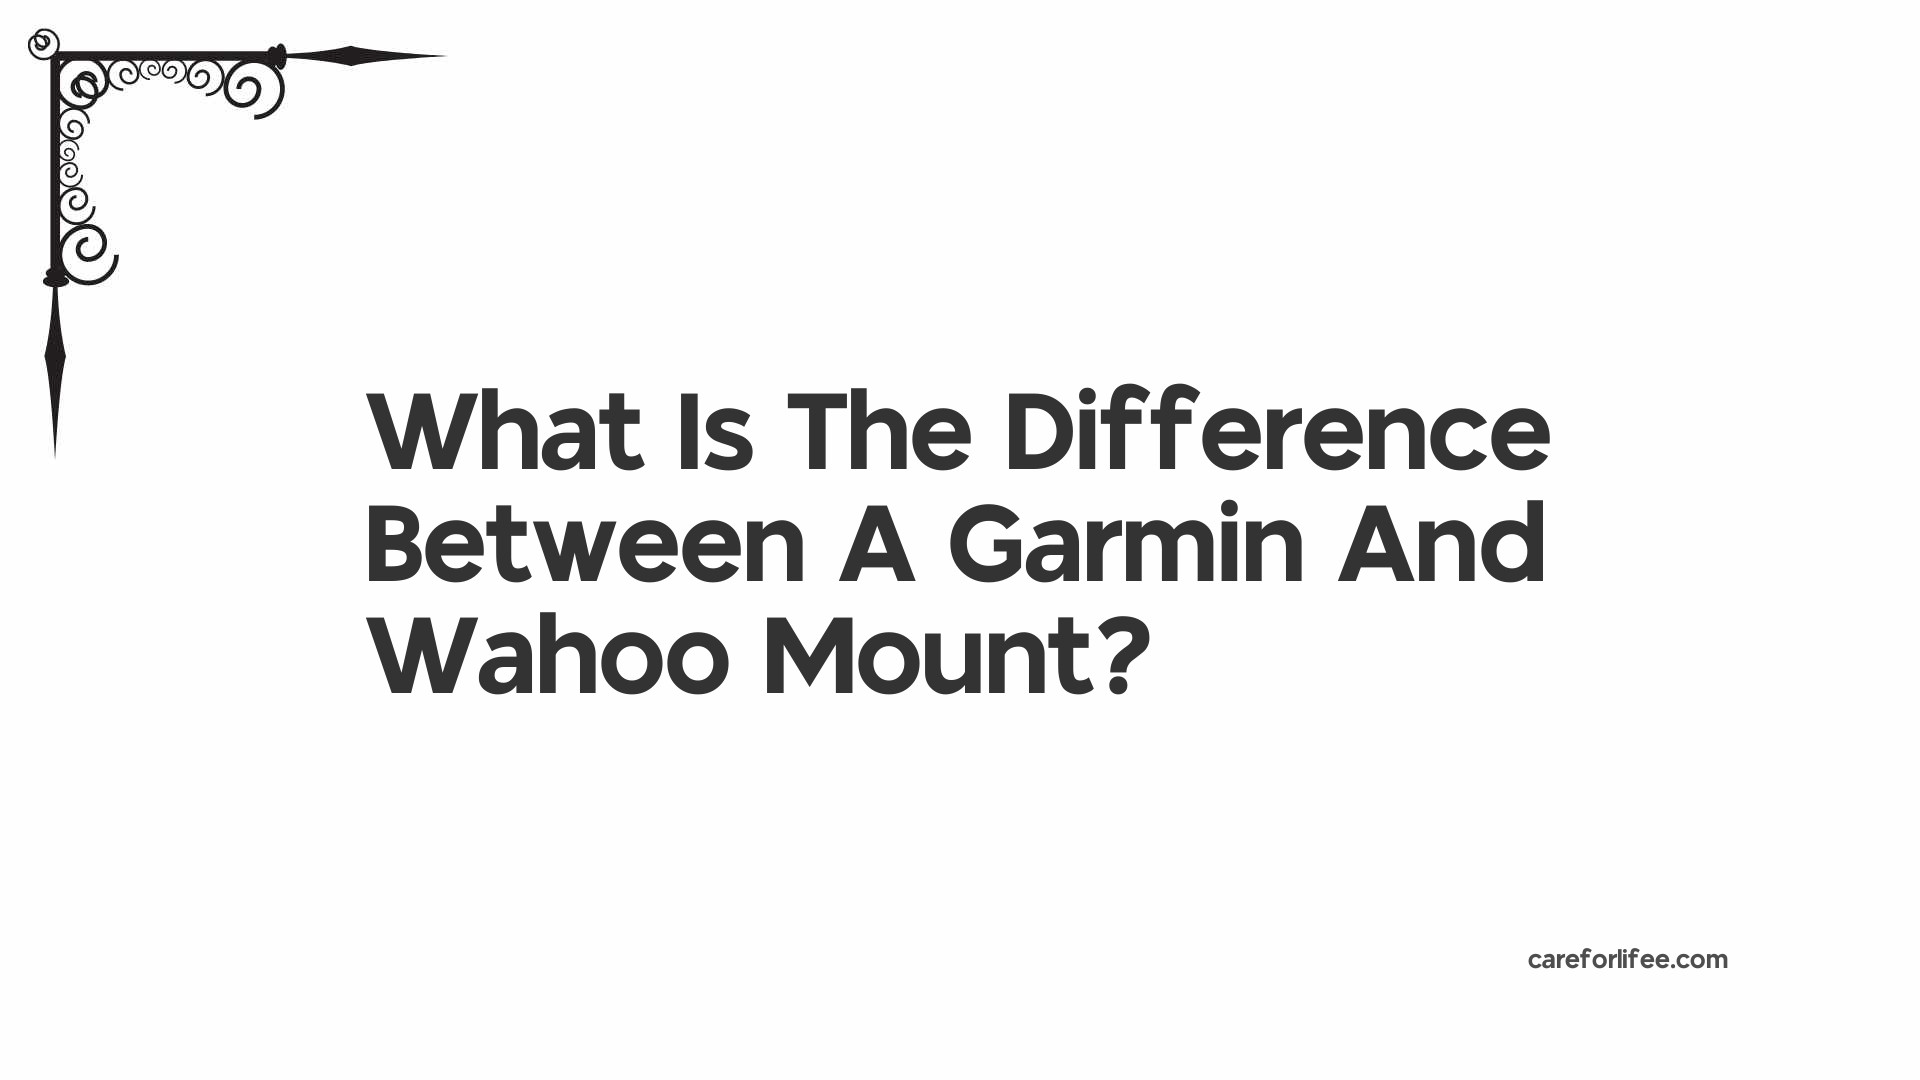 What Is The Difference Between A Garmin And Wahoo Mount?